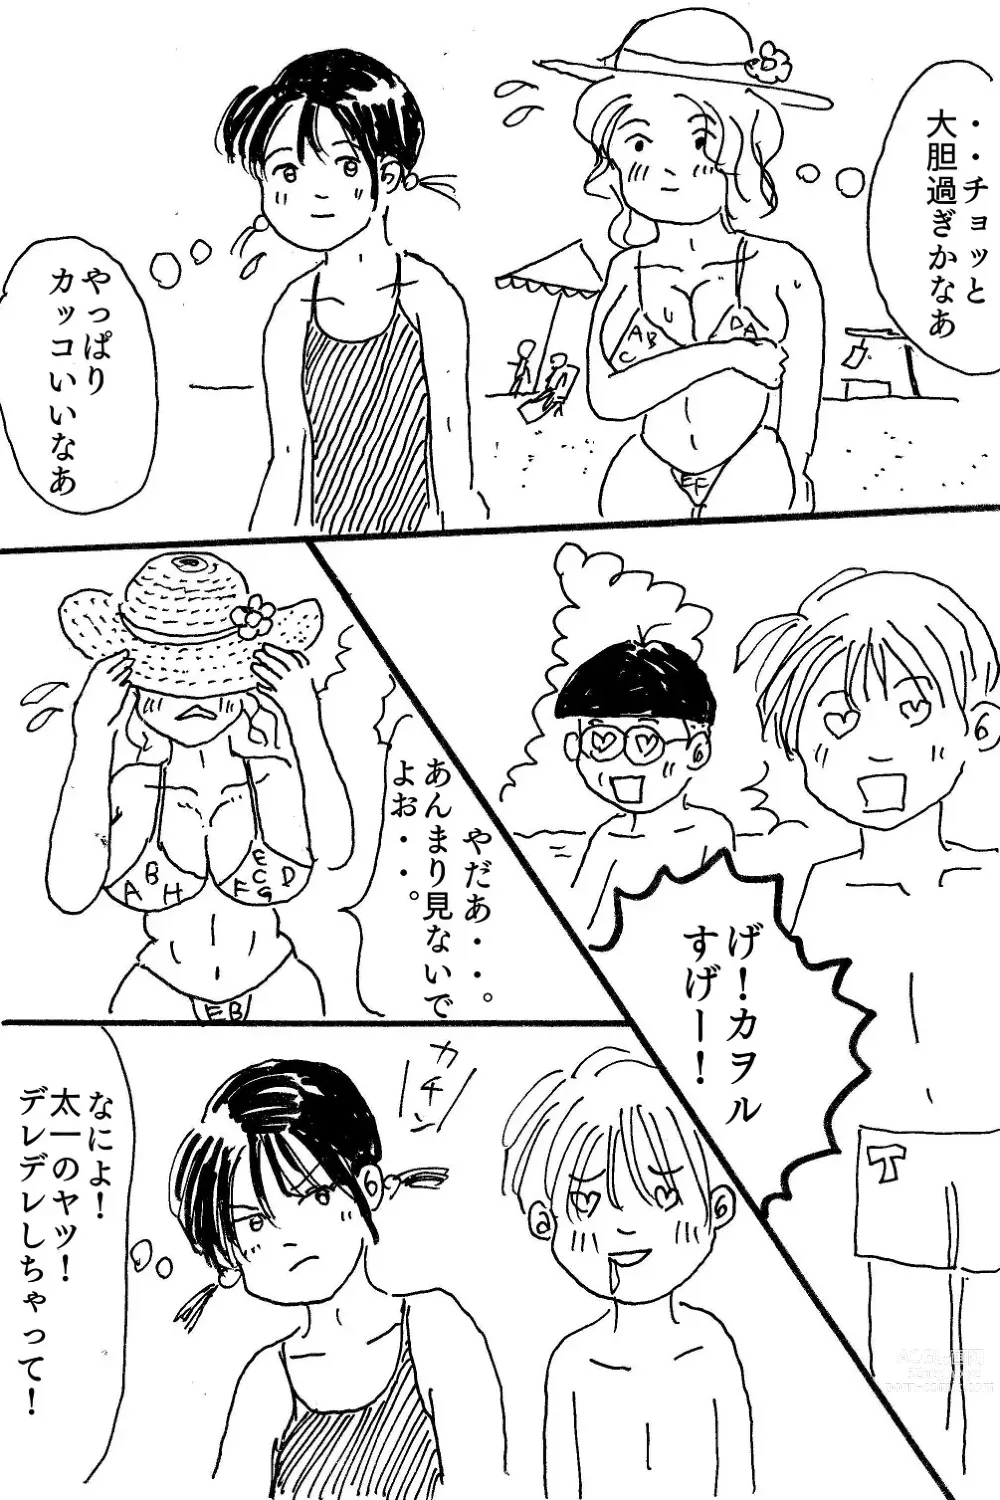 Page 4 of doujinshi 映子と太一